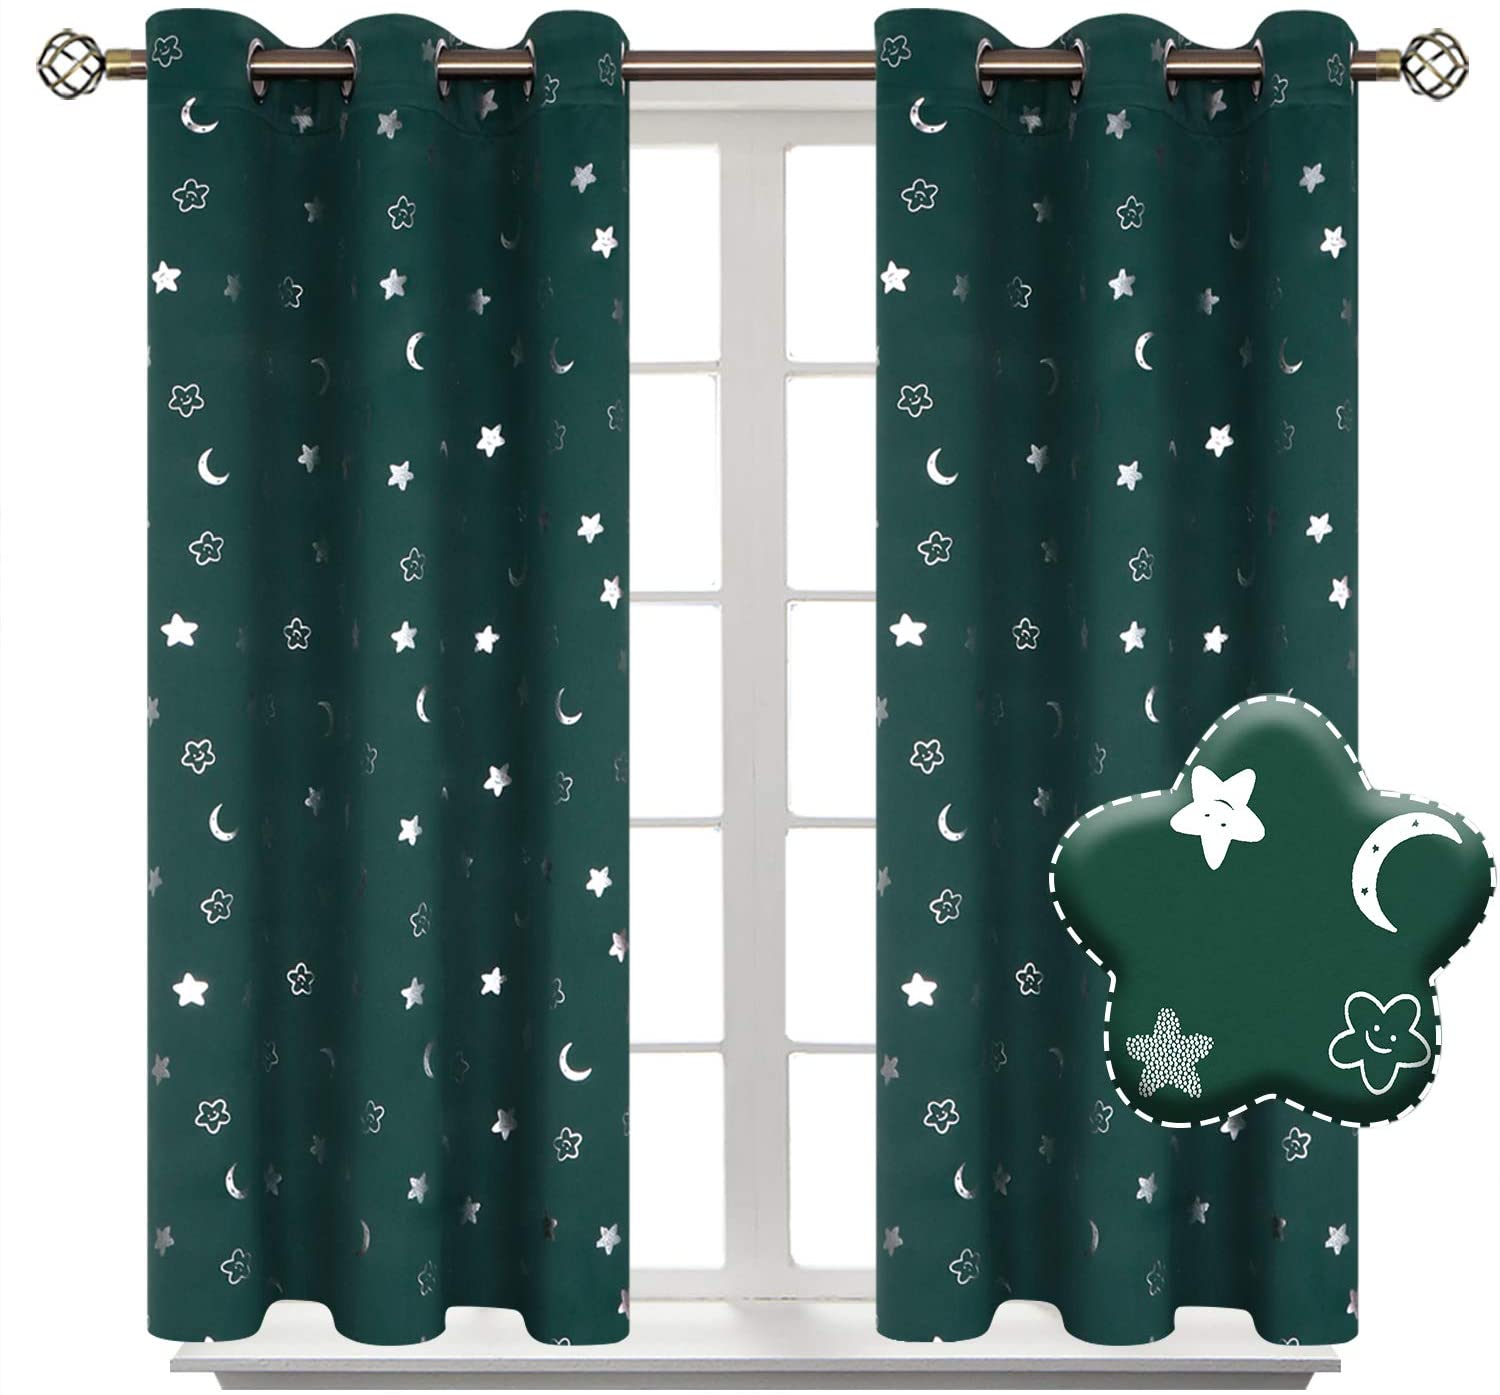 BGment Moon and Stars Blackout Curtains for Kids Bedroom, Grommet Thermal Insula Super zysk